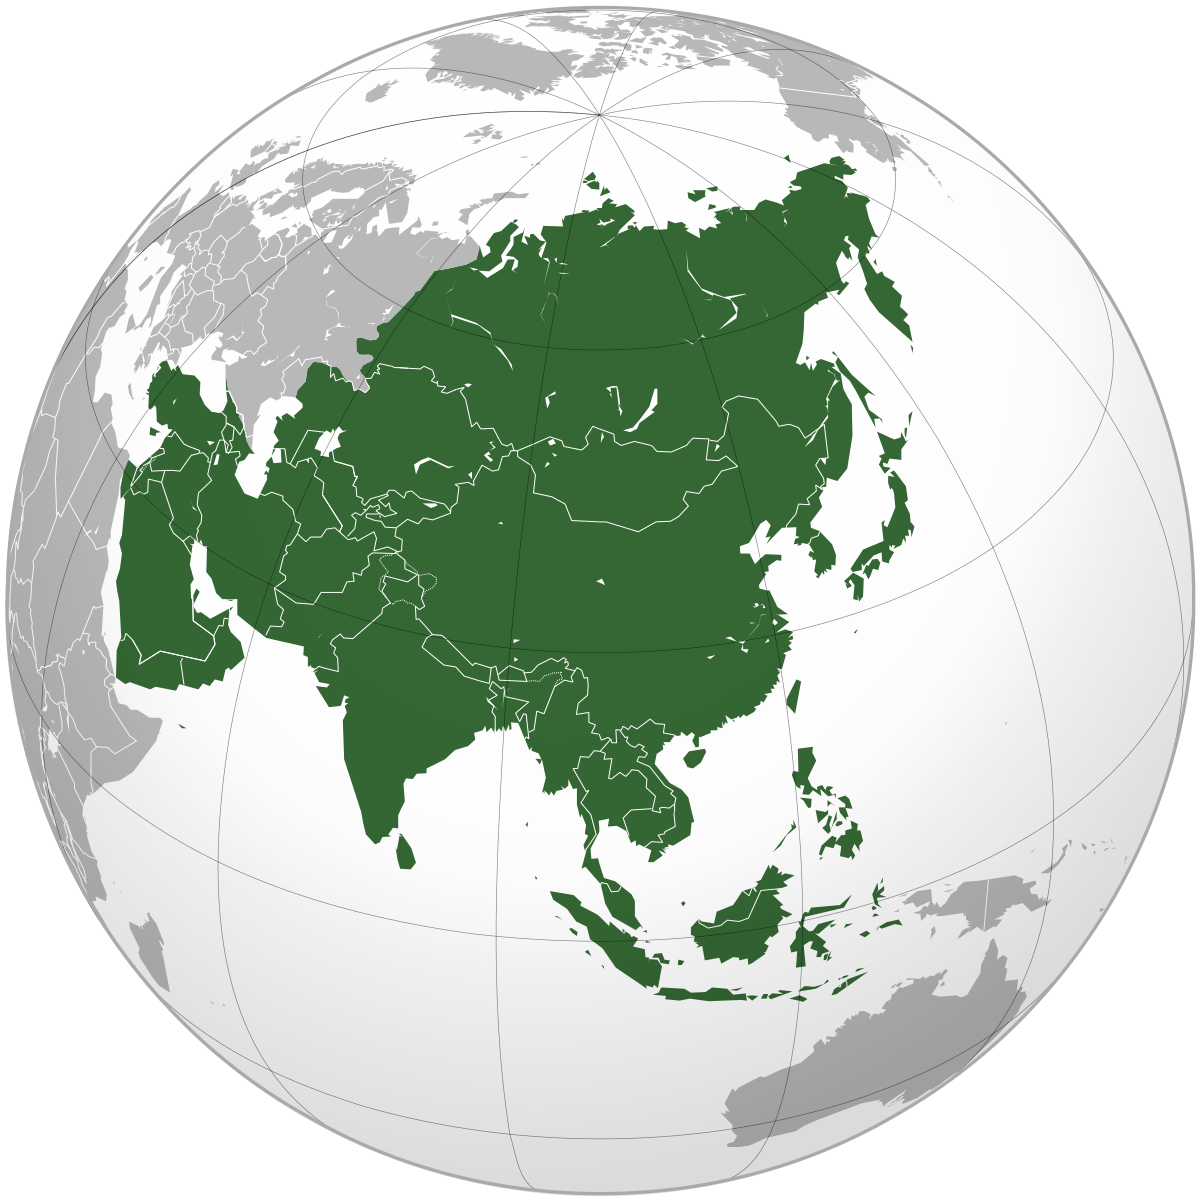 Asian country visa requirements